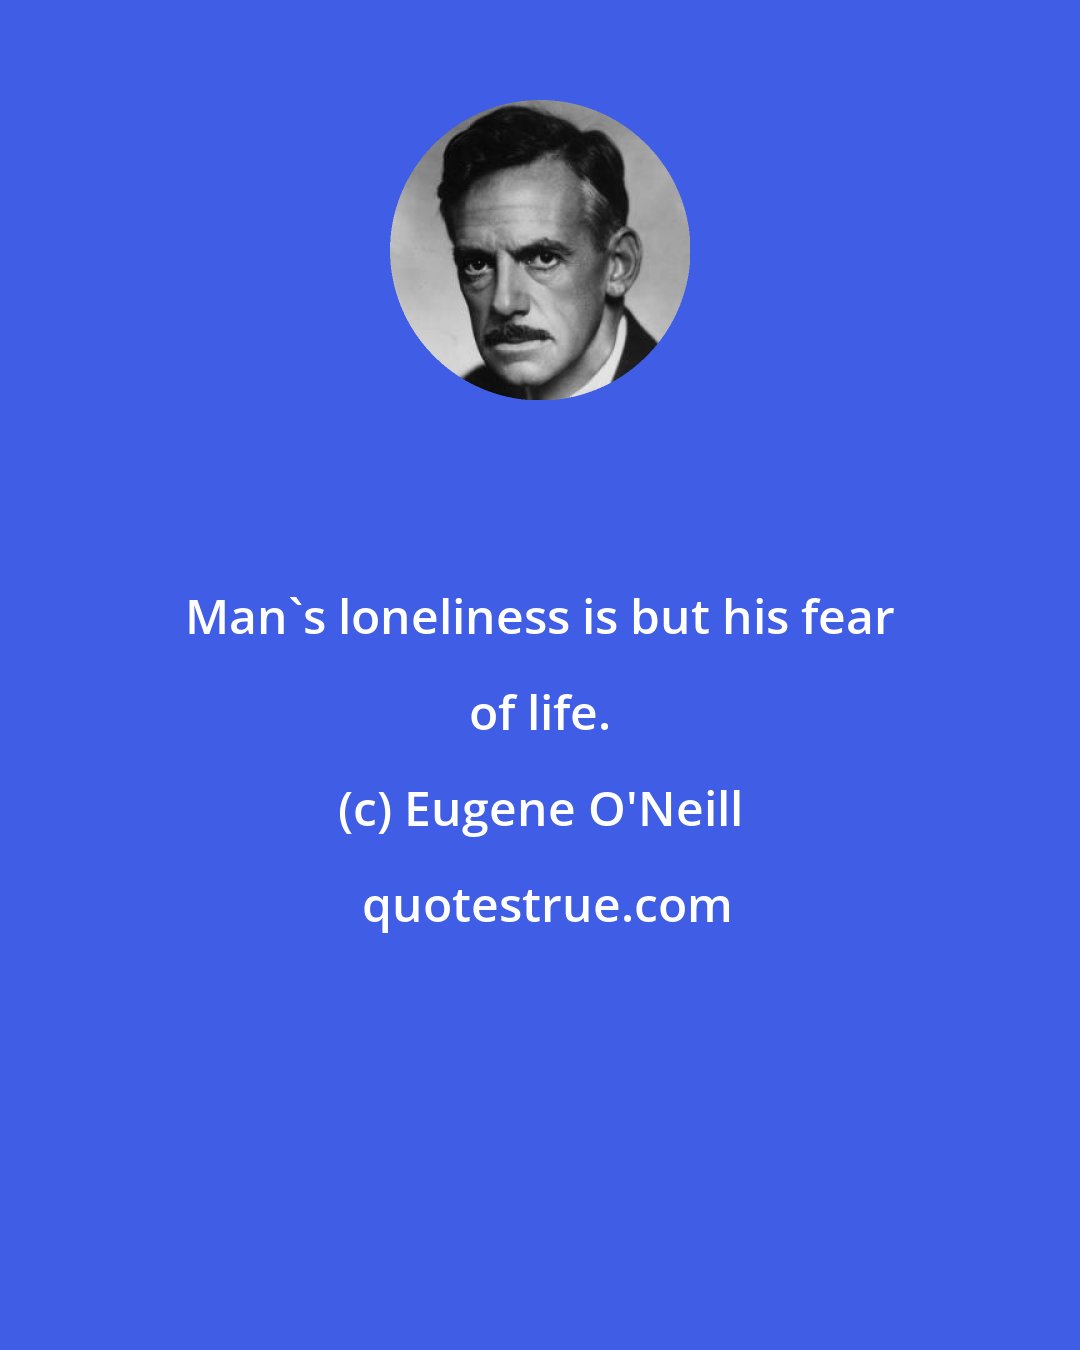 Eugene O'Neill: Man's loneliness is but his fear of life.